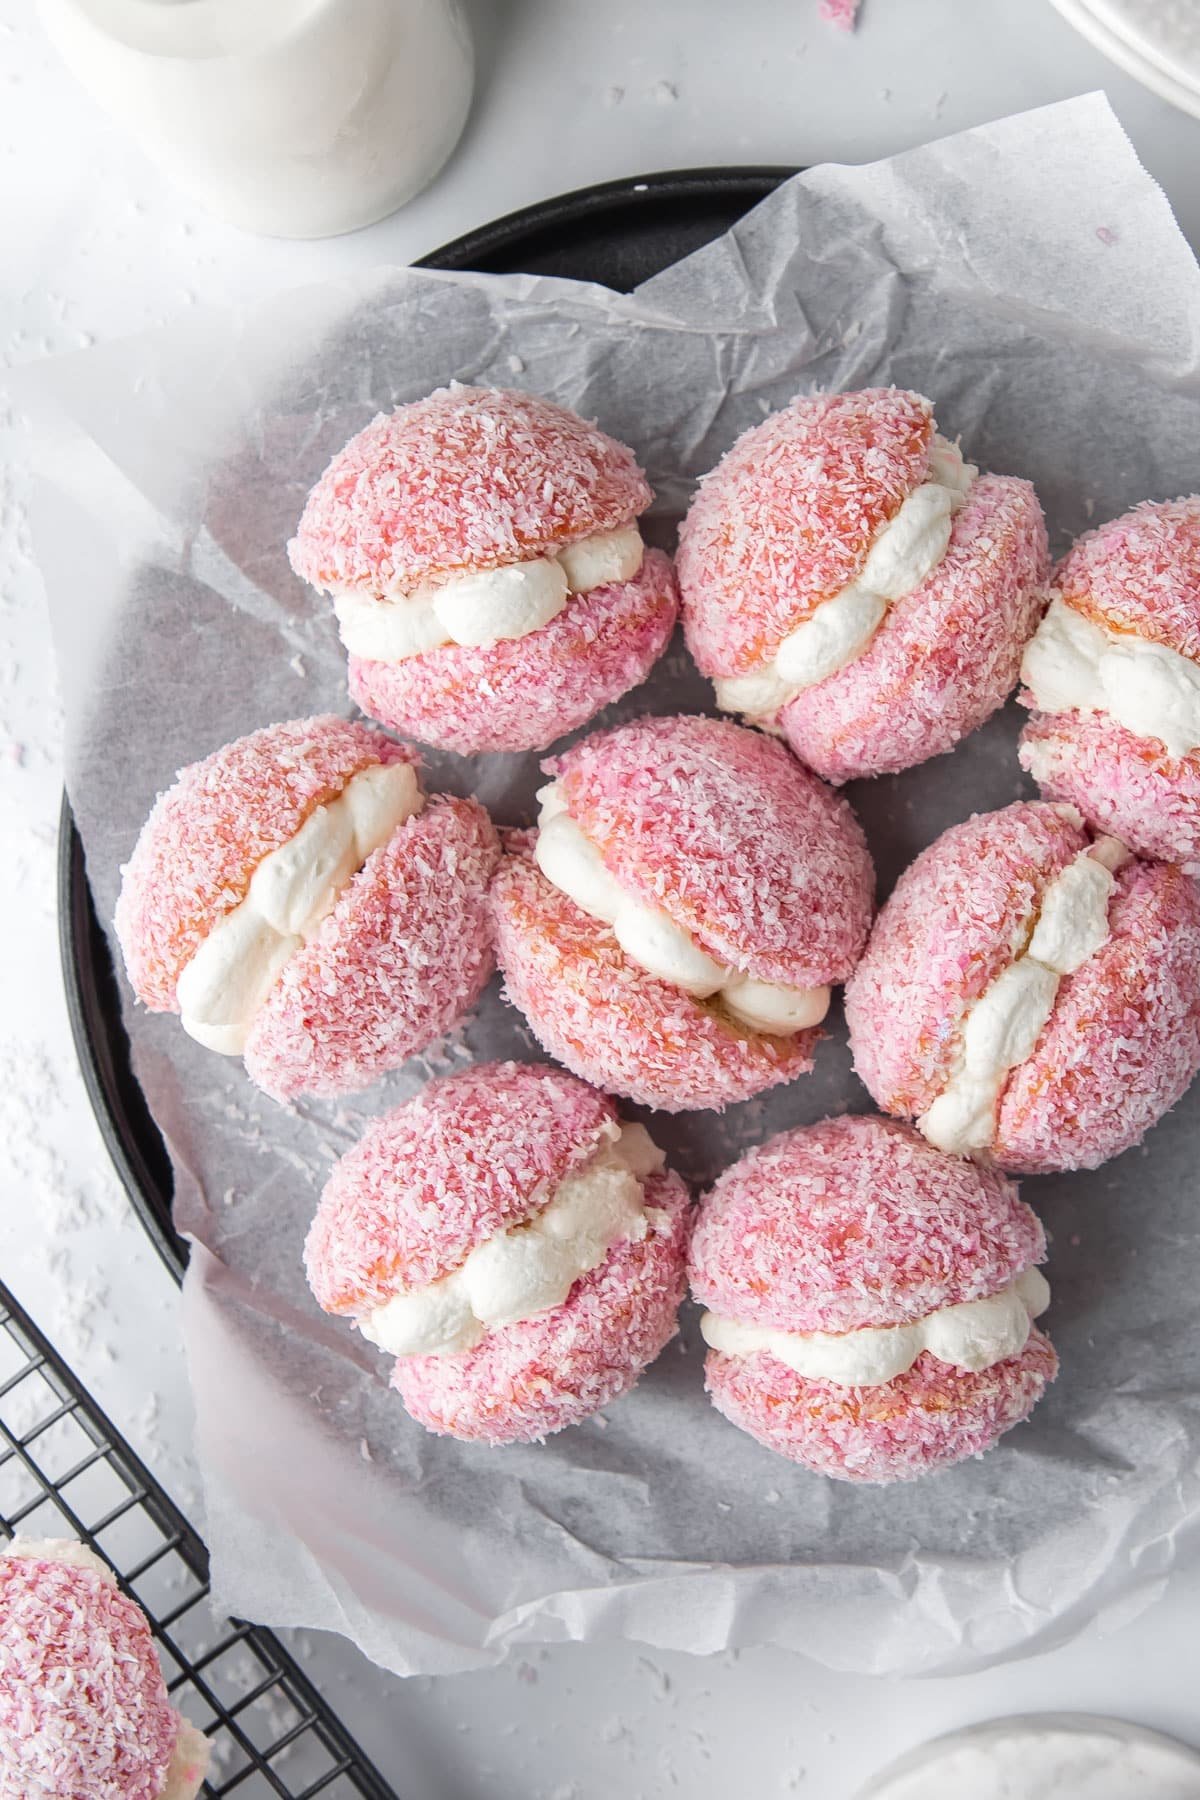 pink jelly cakes coated in coconut, on a black plate.